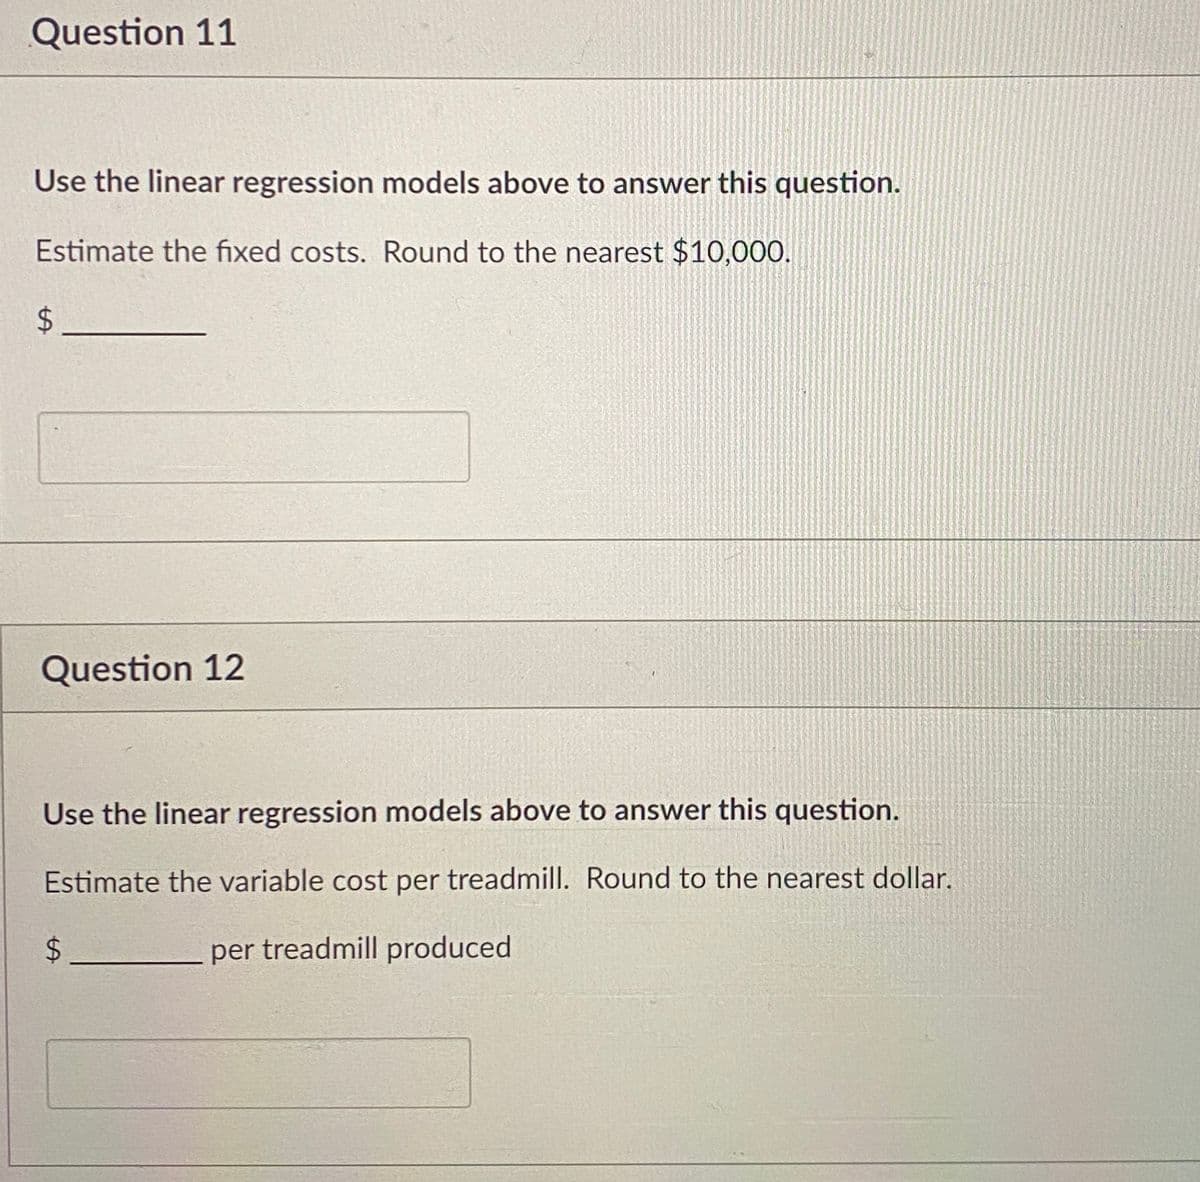 Question 11
Use the linear regression models above to answer this question.
Estimate the fixed costs. Round to the nearest $10,000.
$
Question 12
Use the linear regression models above to answer this question.
Estimate the variable cost per treadmill. Round to the nearest dollar.
per treadmill produced
LA
$